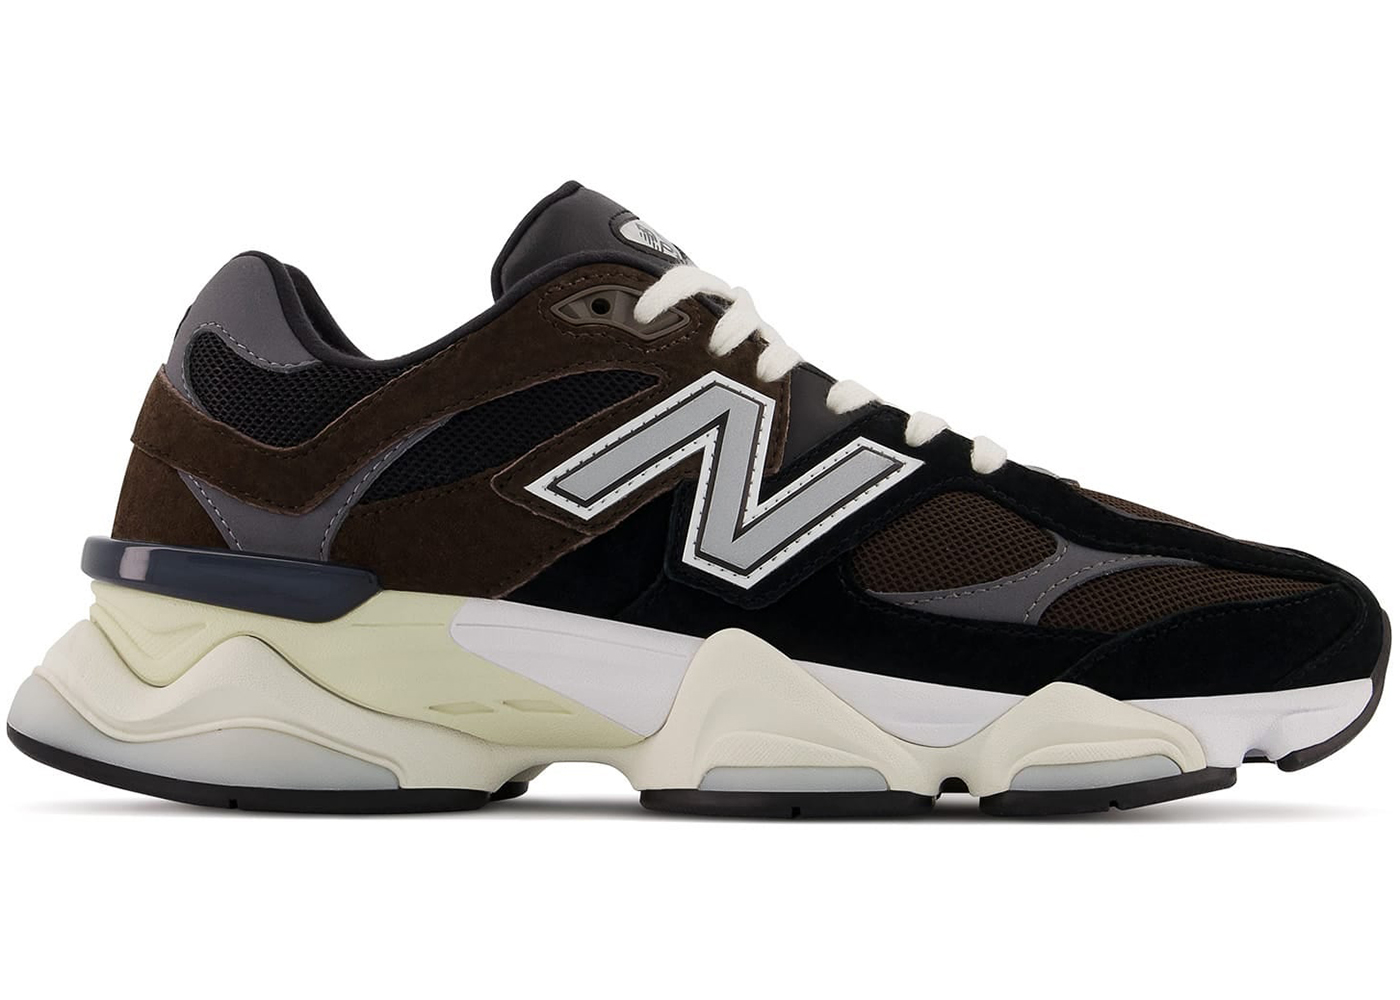 New Balance 9060 Brown Black against a white background